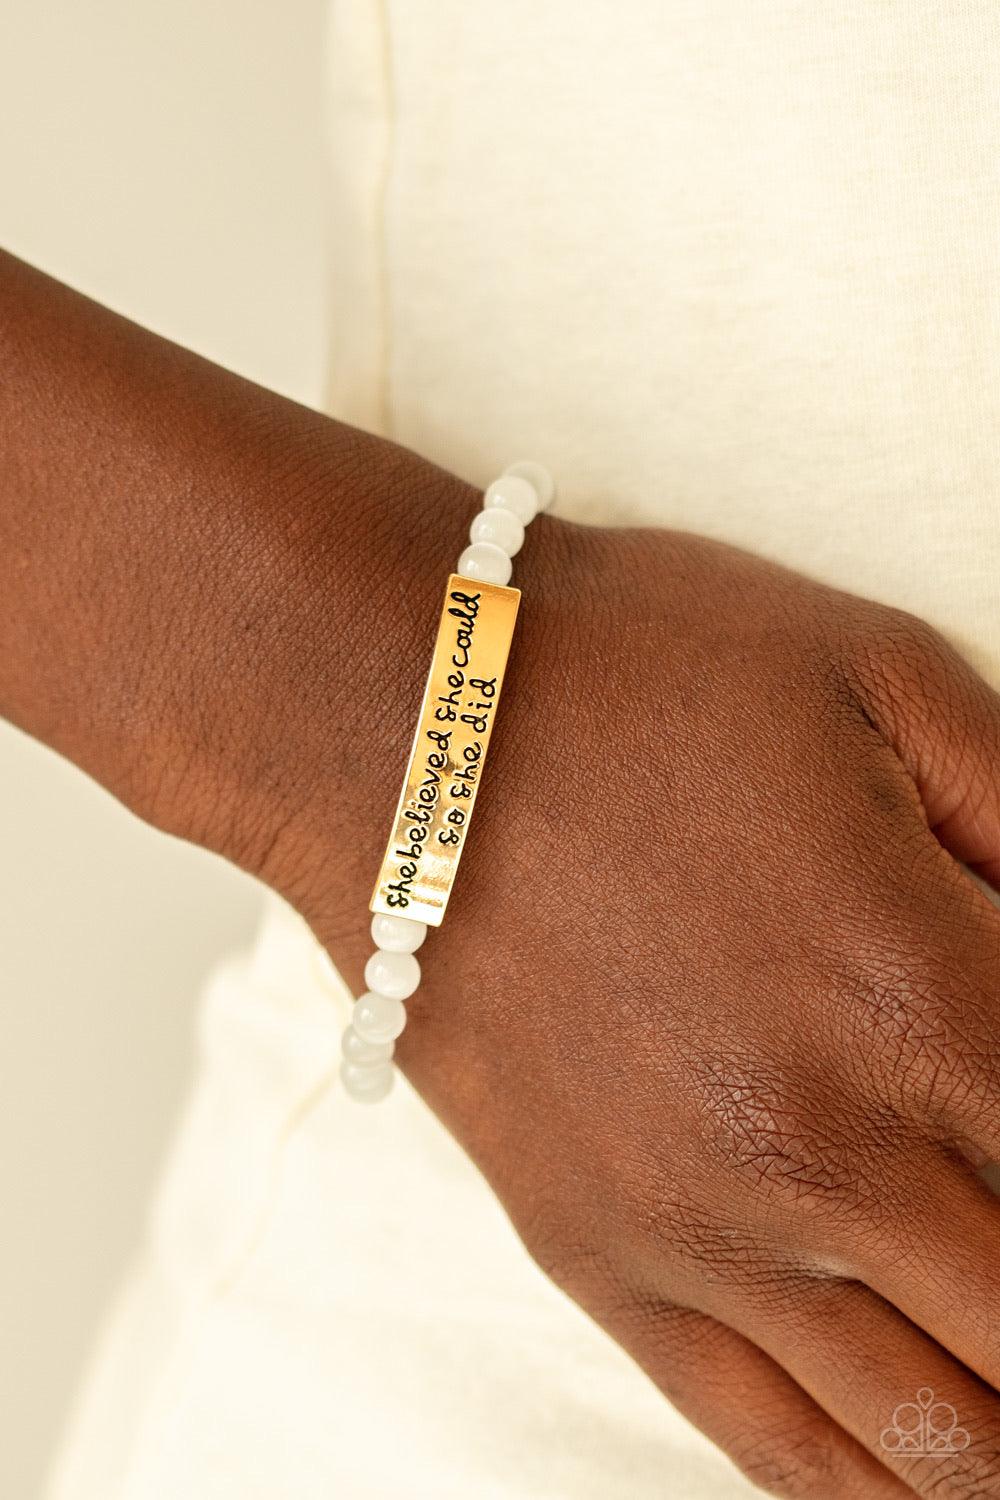 Paparazzi Accessories So She Did - Gold A collection of dainty white cat’s eye stone beads and a gold frame stamped in the inspirational phrase, “She believed she could, so she did”, are threaded along a stretchy band around the wrist for a whimsical fash